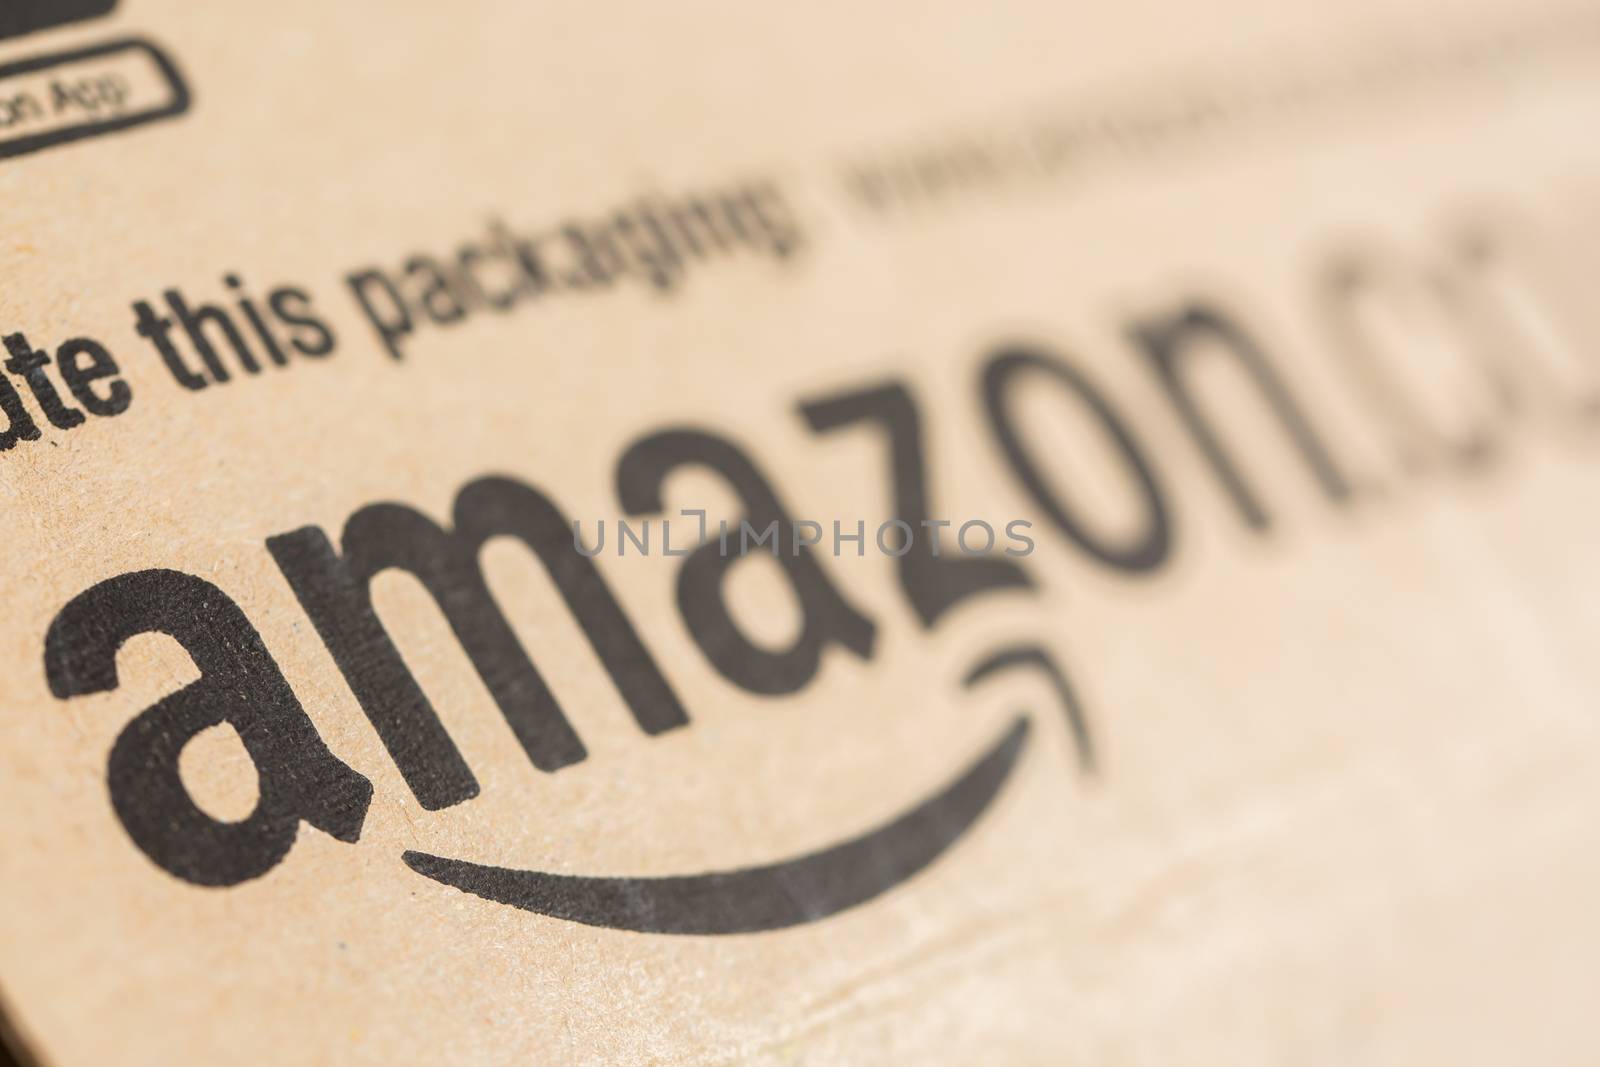 Paris, France - December 15, 2016: Amazon Prime Parcel Package. Amazon, is an American electronic commerce and cloud computing company,based in Seattle, Washington. Started as an online bookstore, Amazon is become the most importrant retailer in the United States by market capitalization